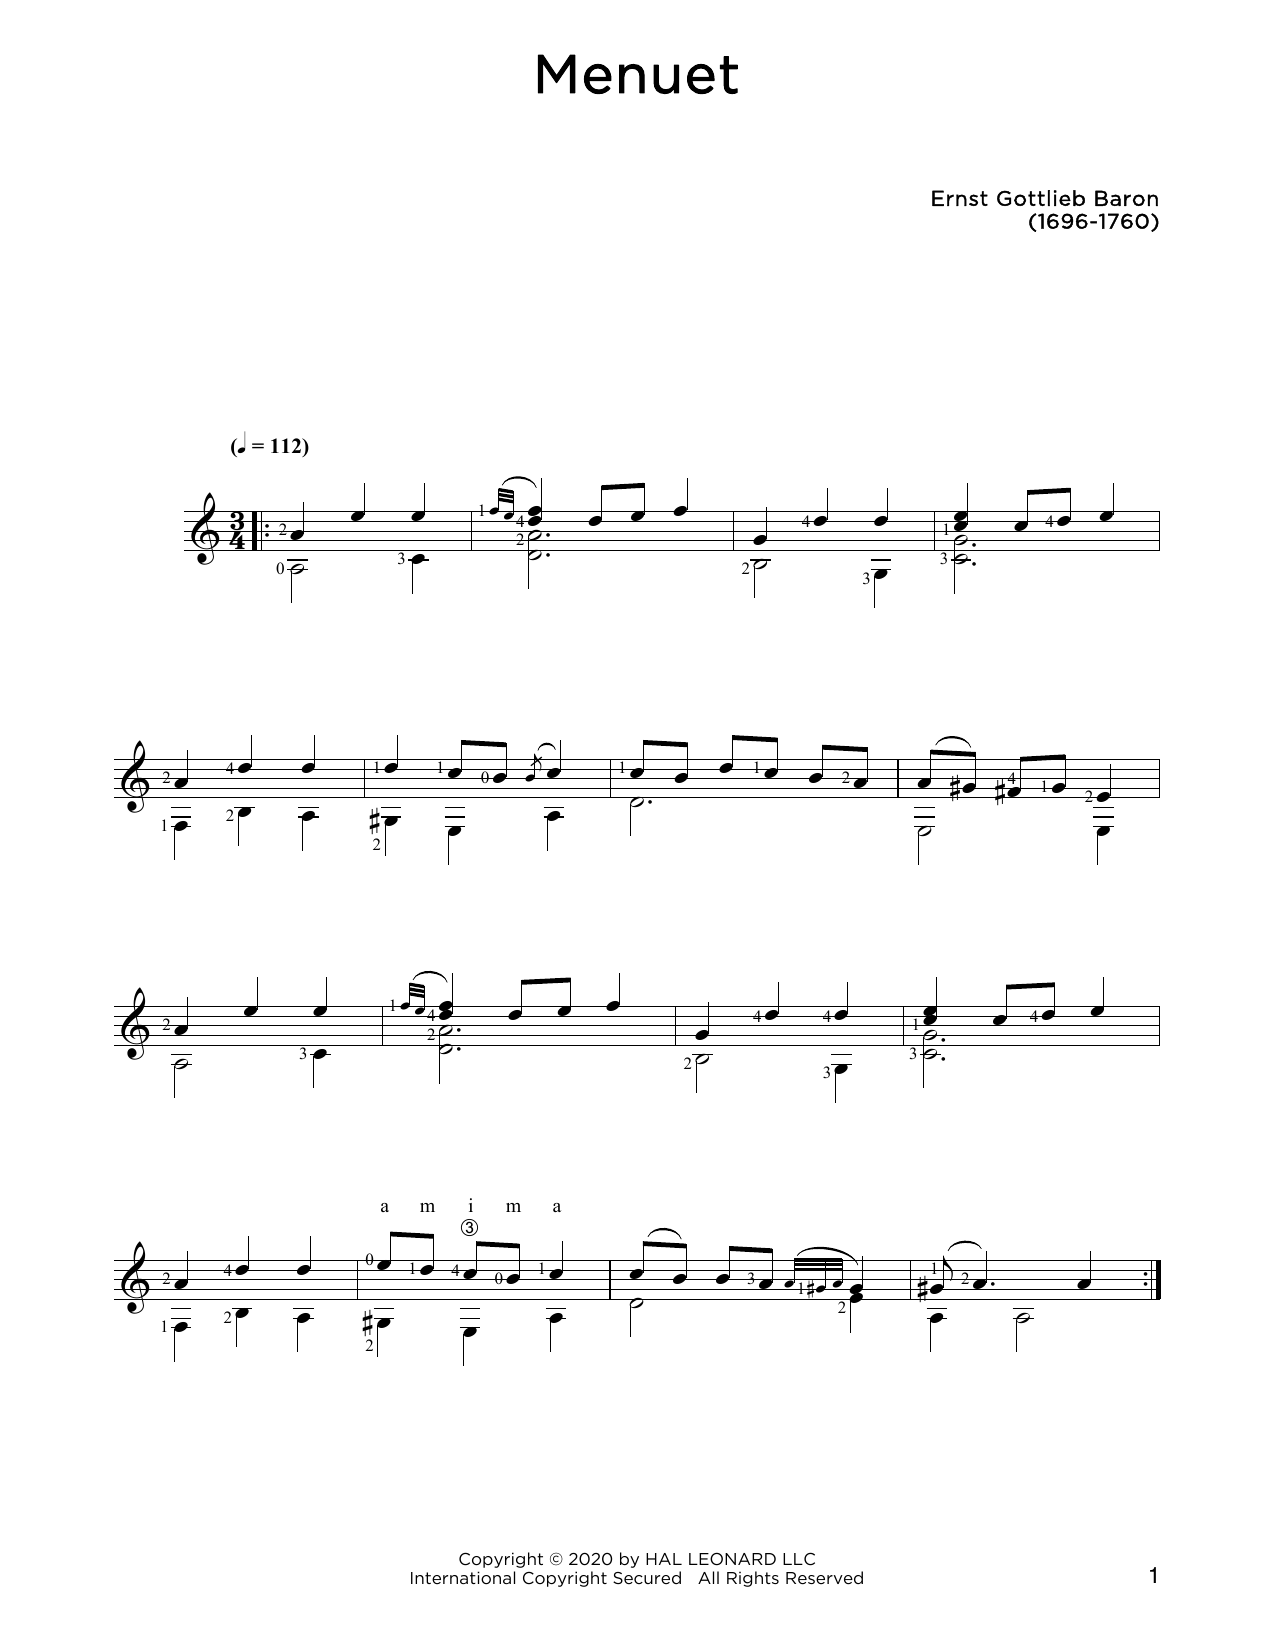 Download Ernst Gottlieb Baron Menuet sheet music and printable PDF score & Classical music notes